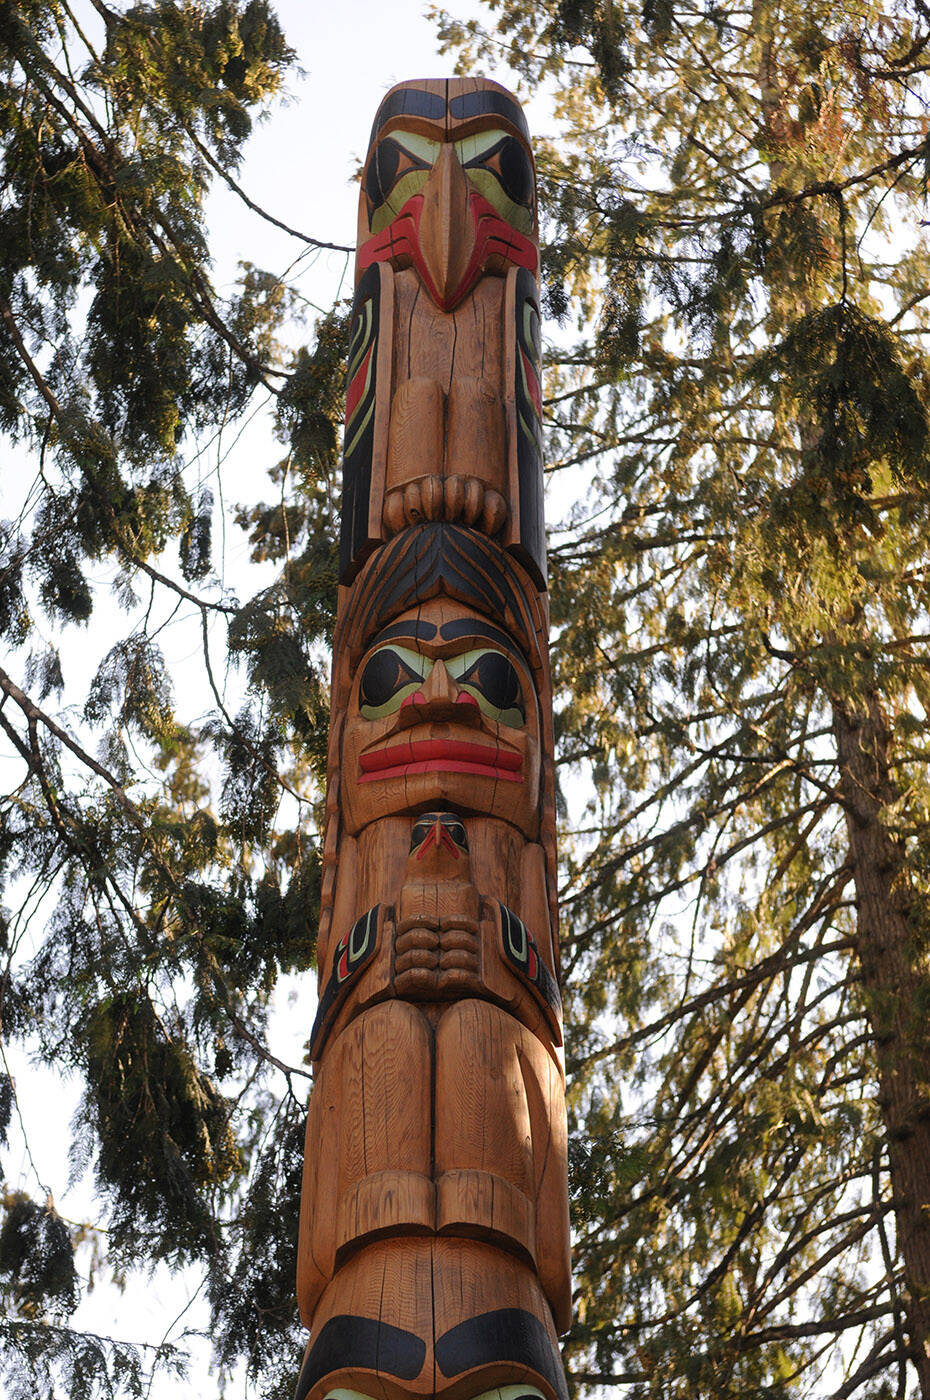 This totem pole was rededicated to the late Chief Richard Malloway outside the Cultus Lake Park Board office on Tuesday, Sept. 20, 2022. The top figure is a raven representing the late Chief Richard Malloway. The second one is a woman holding a baby eagle representing the Cultus Lake Park Board. (Jenna Hauck/ Chilliwack Progress)